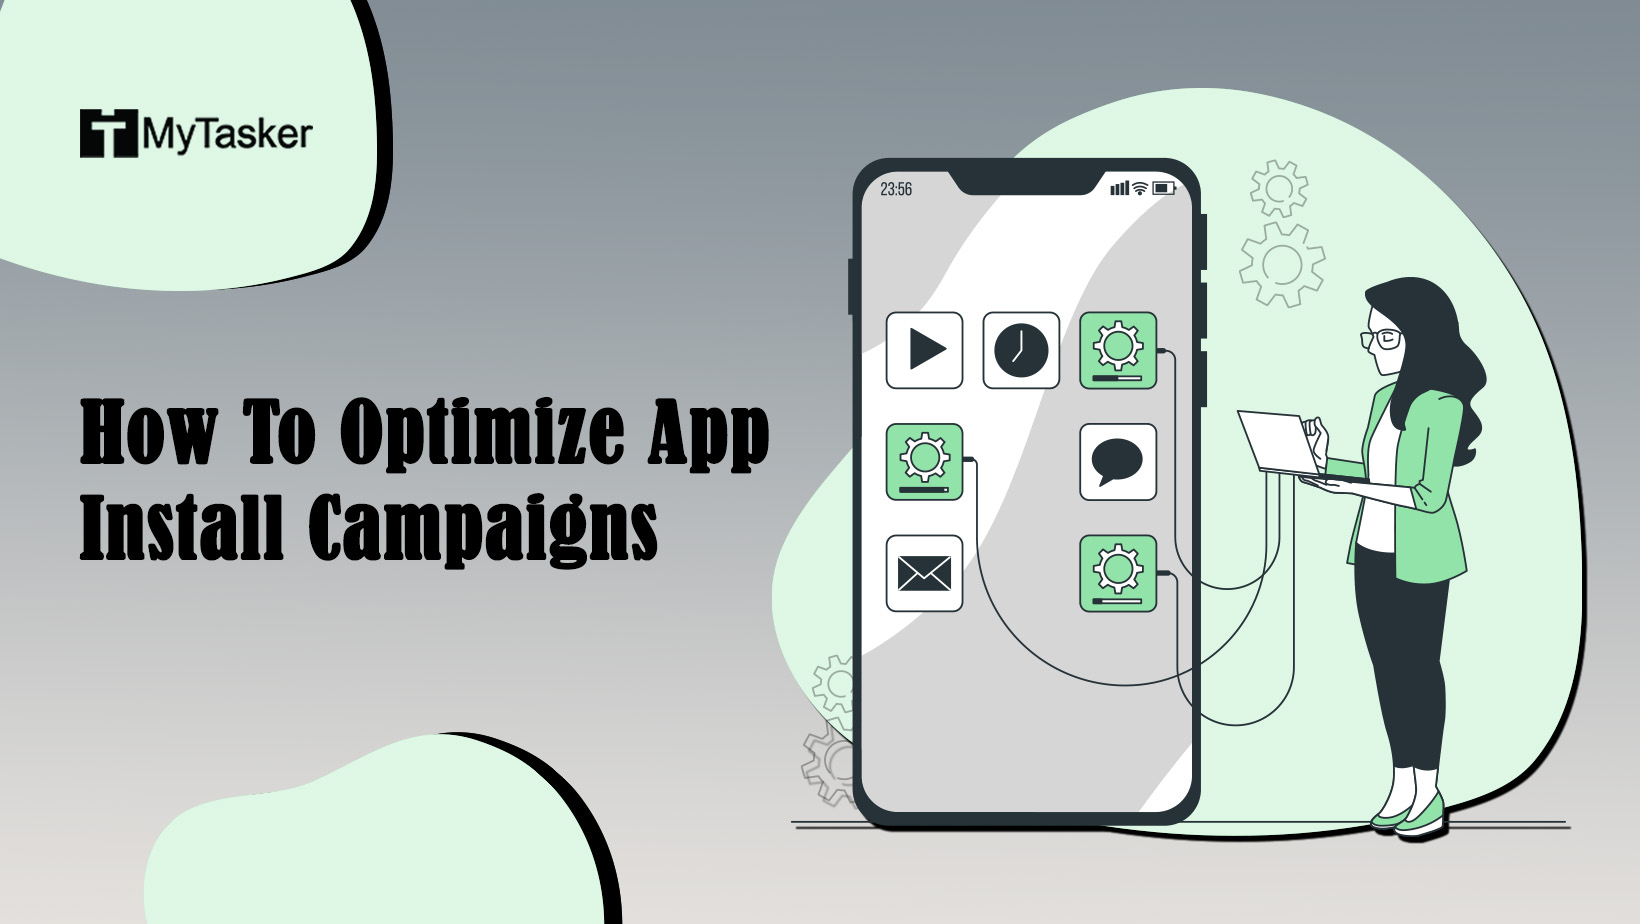 How To Optimize App Install Campaigns